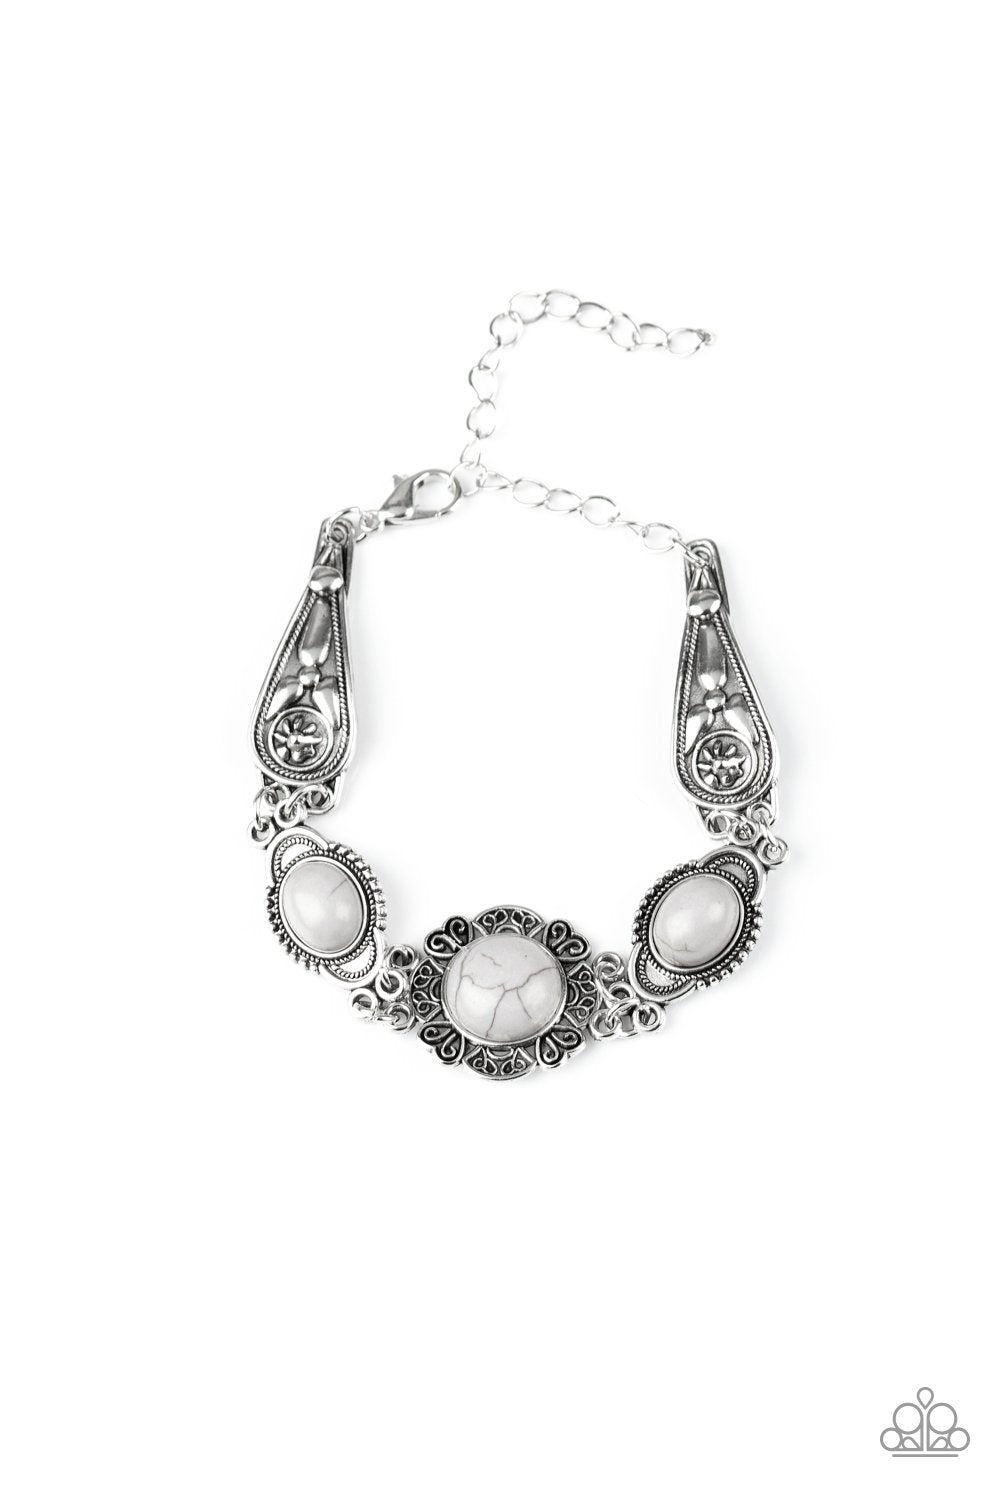 Serenely Southern Silver Stone Bracelet - Paparazzi Accessories-CarasShop.com - $5 Jewelry by Cara Jewels